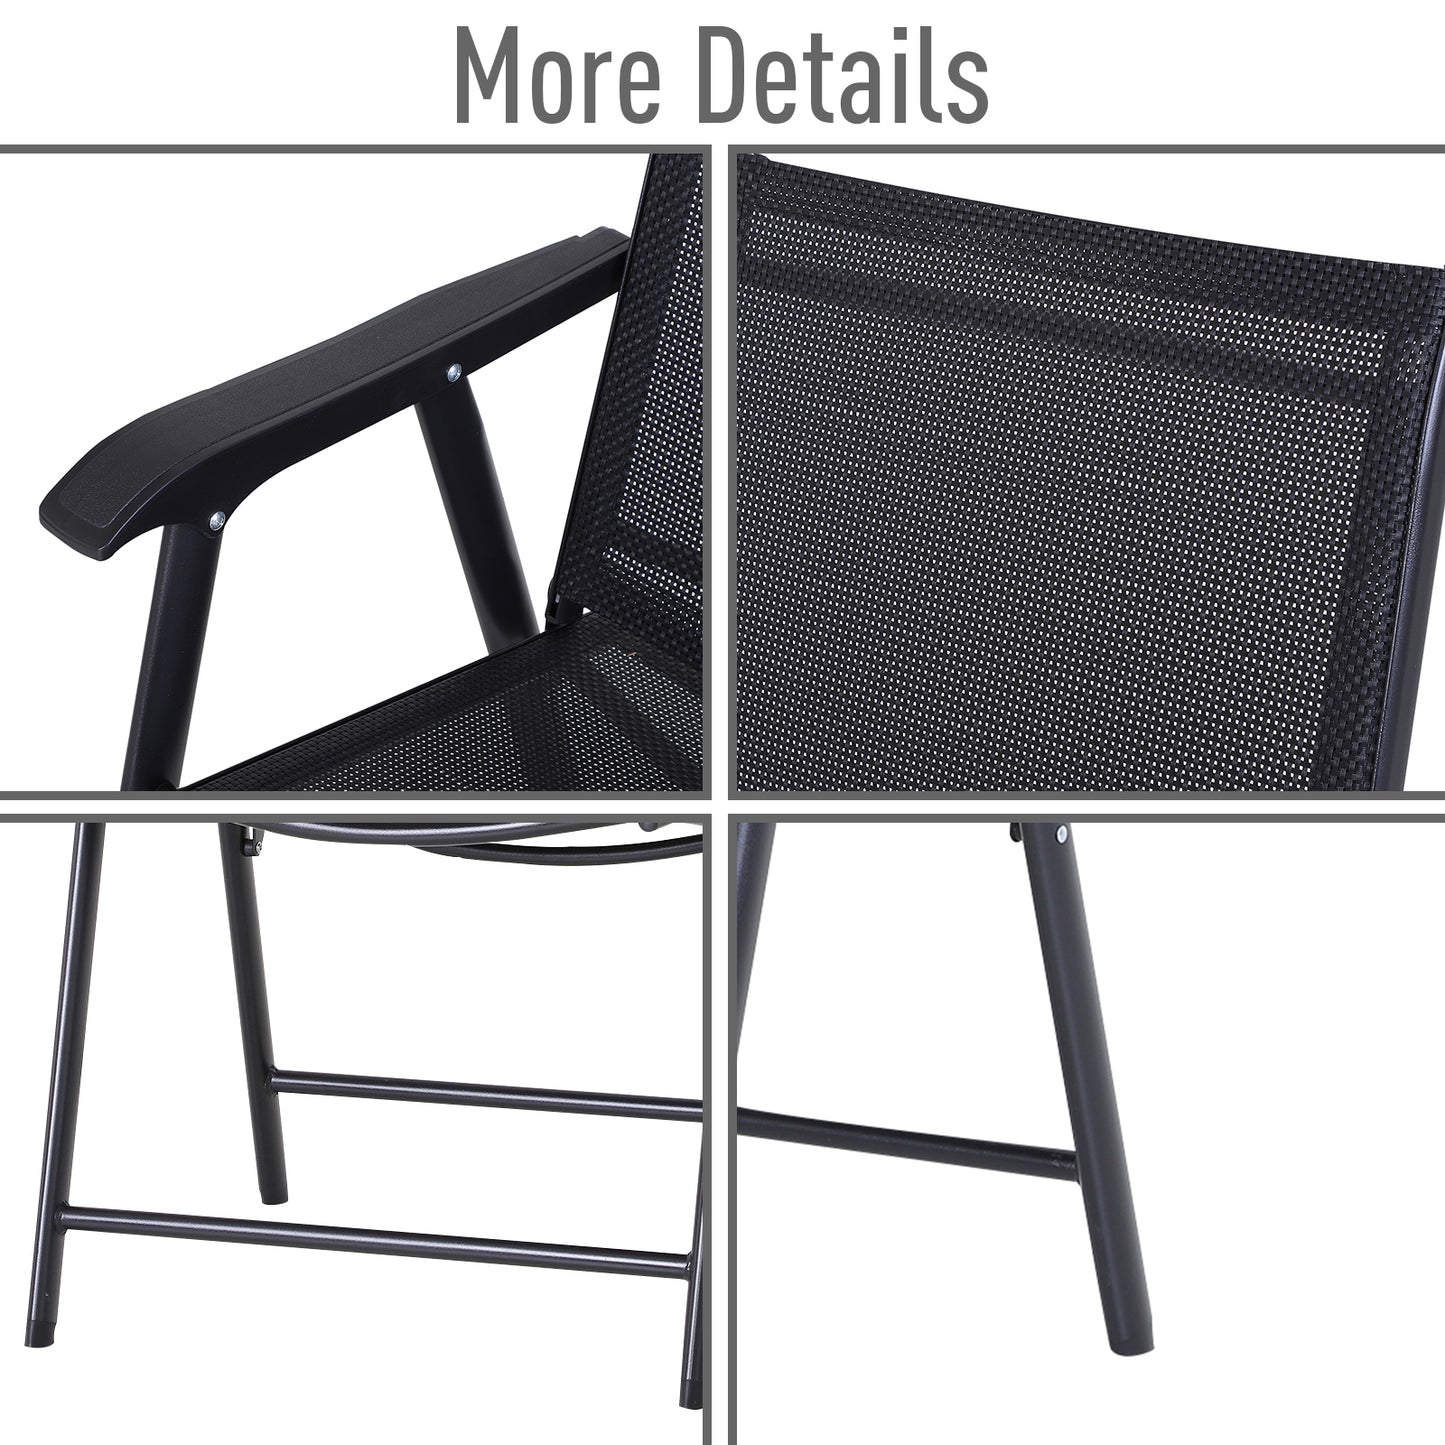 Outsunny Set of 2 Foldable Outdoor Garden Chairs Steel Frame Black